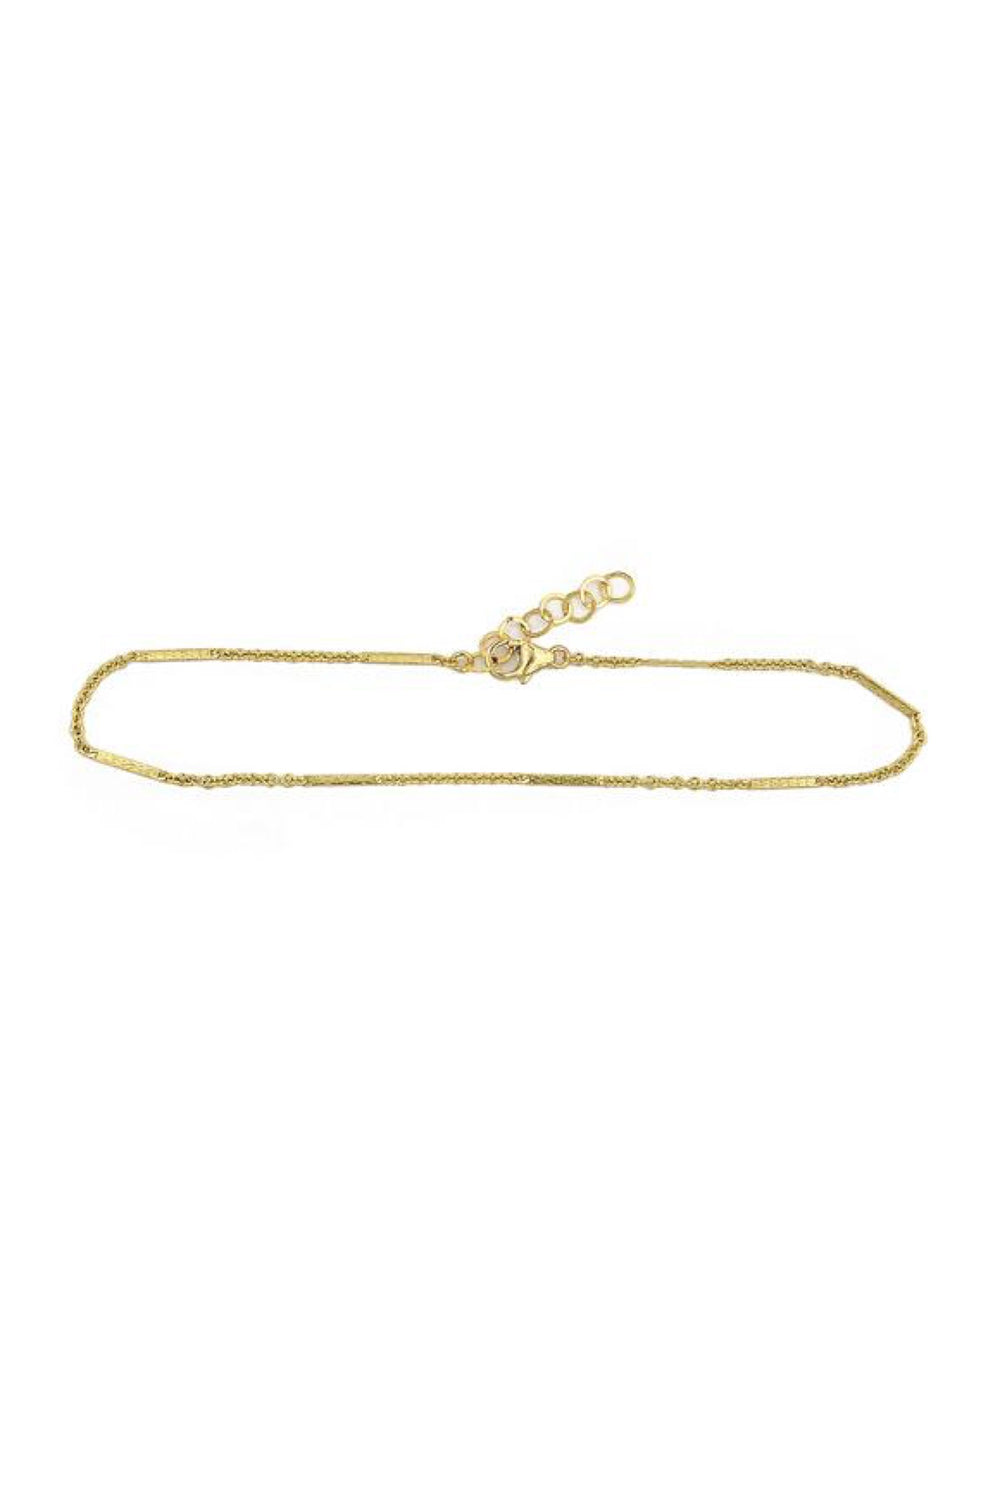 Gold Dash Chain Anklet